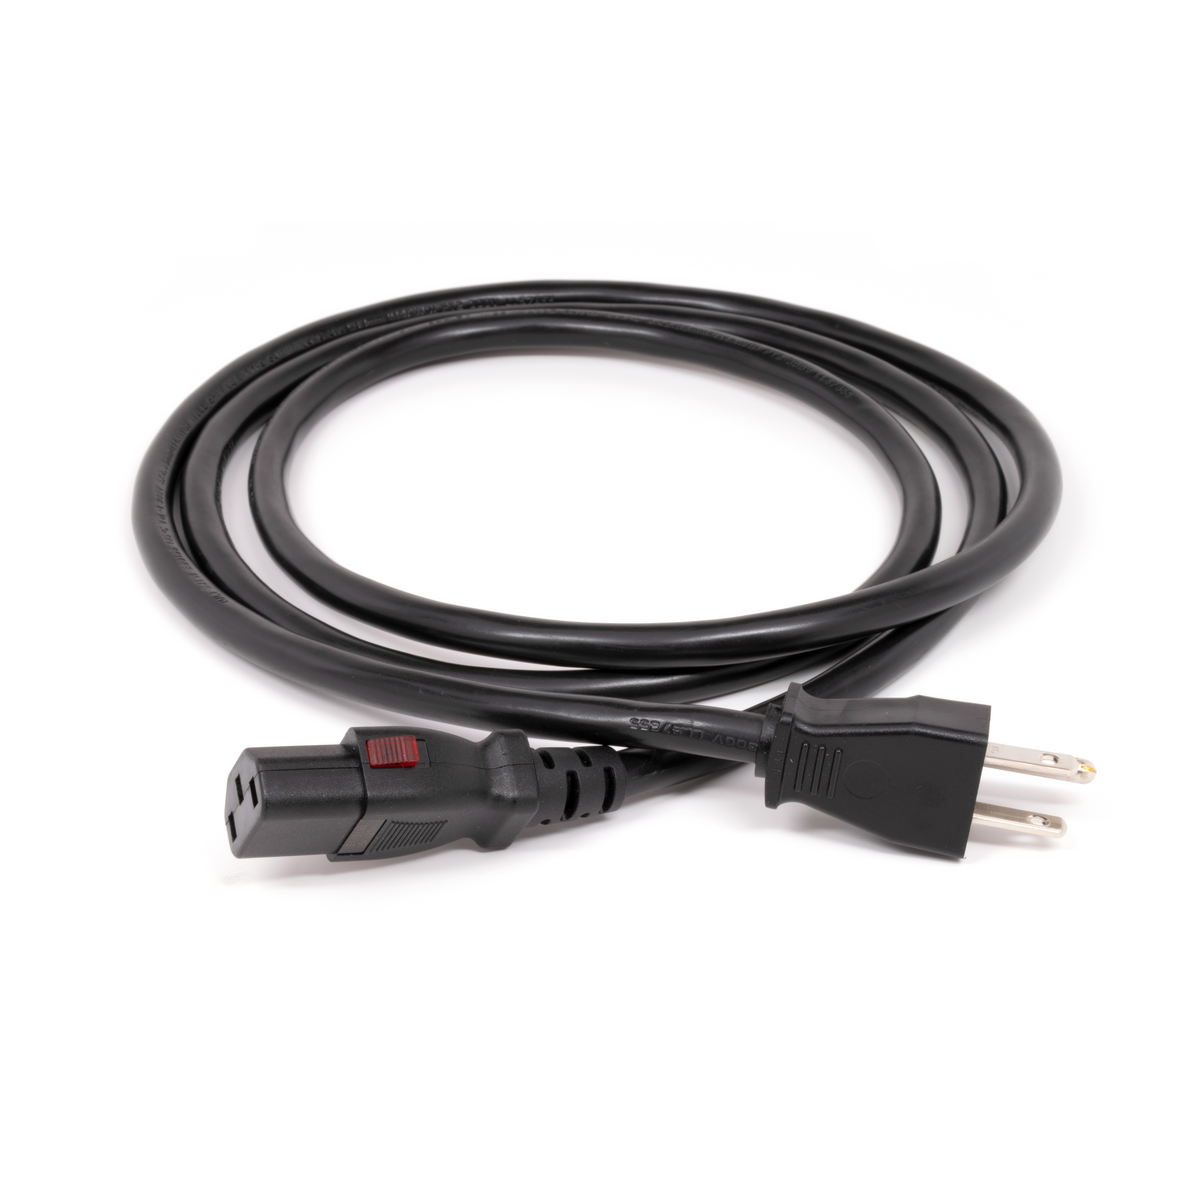 Benchmark Studio&Stage™ XLR Cable for Digital Audio - Benchmark